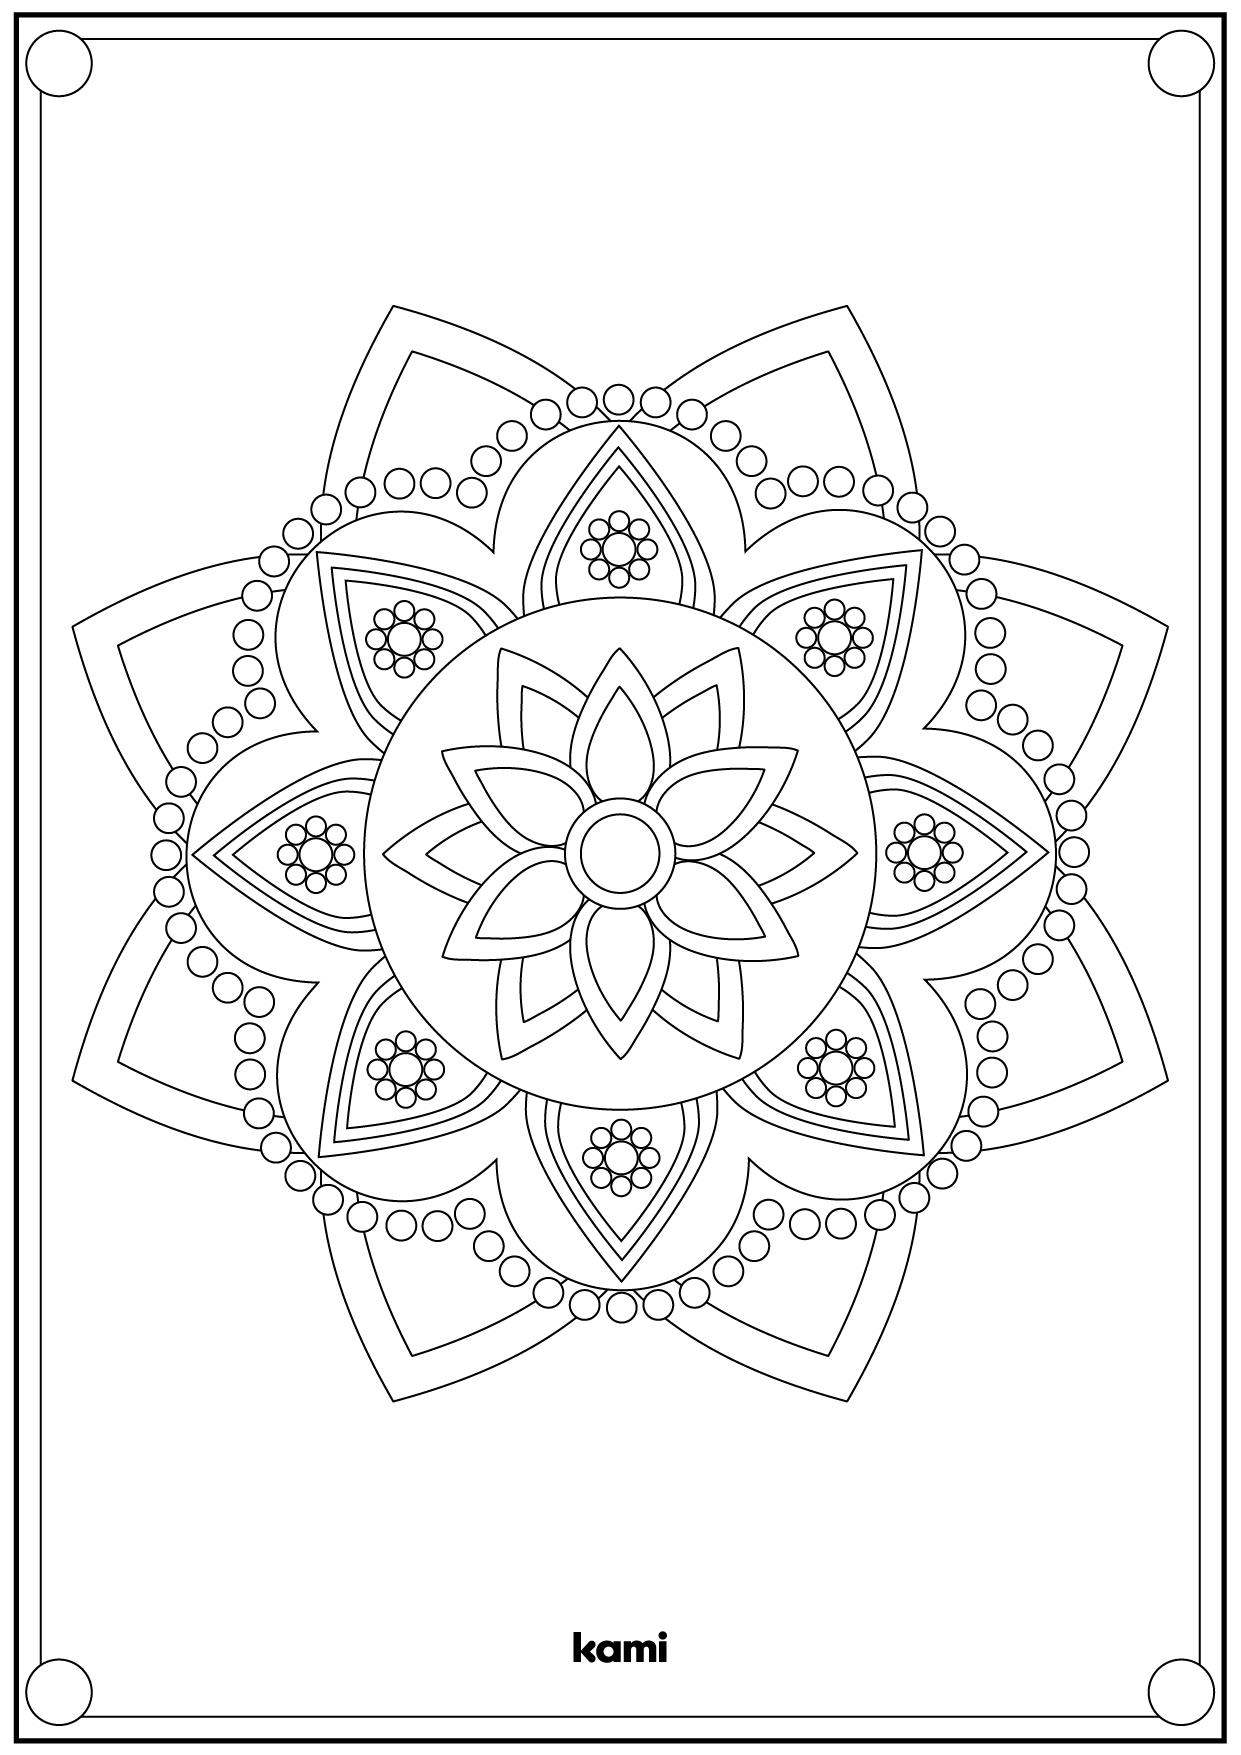 Rangoli coloring sheet pattern four for teachers perfect for grades st nd k pre k other classroom resources kami library